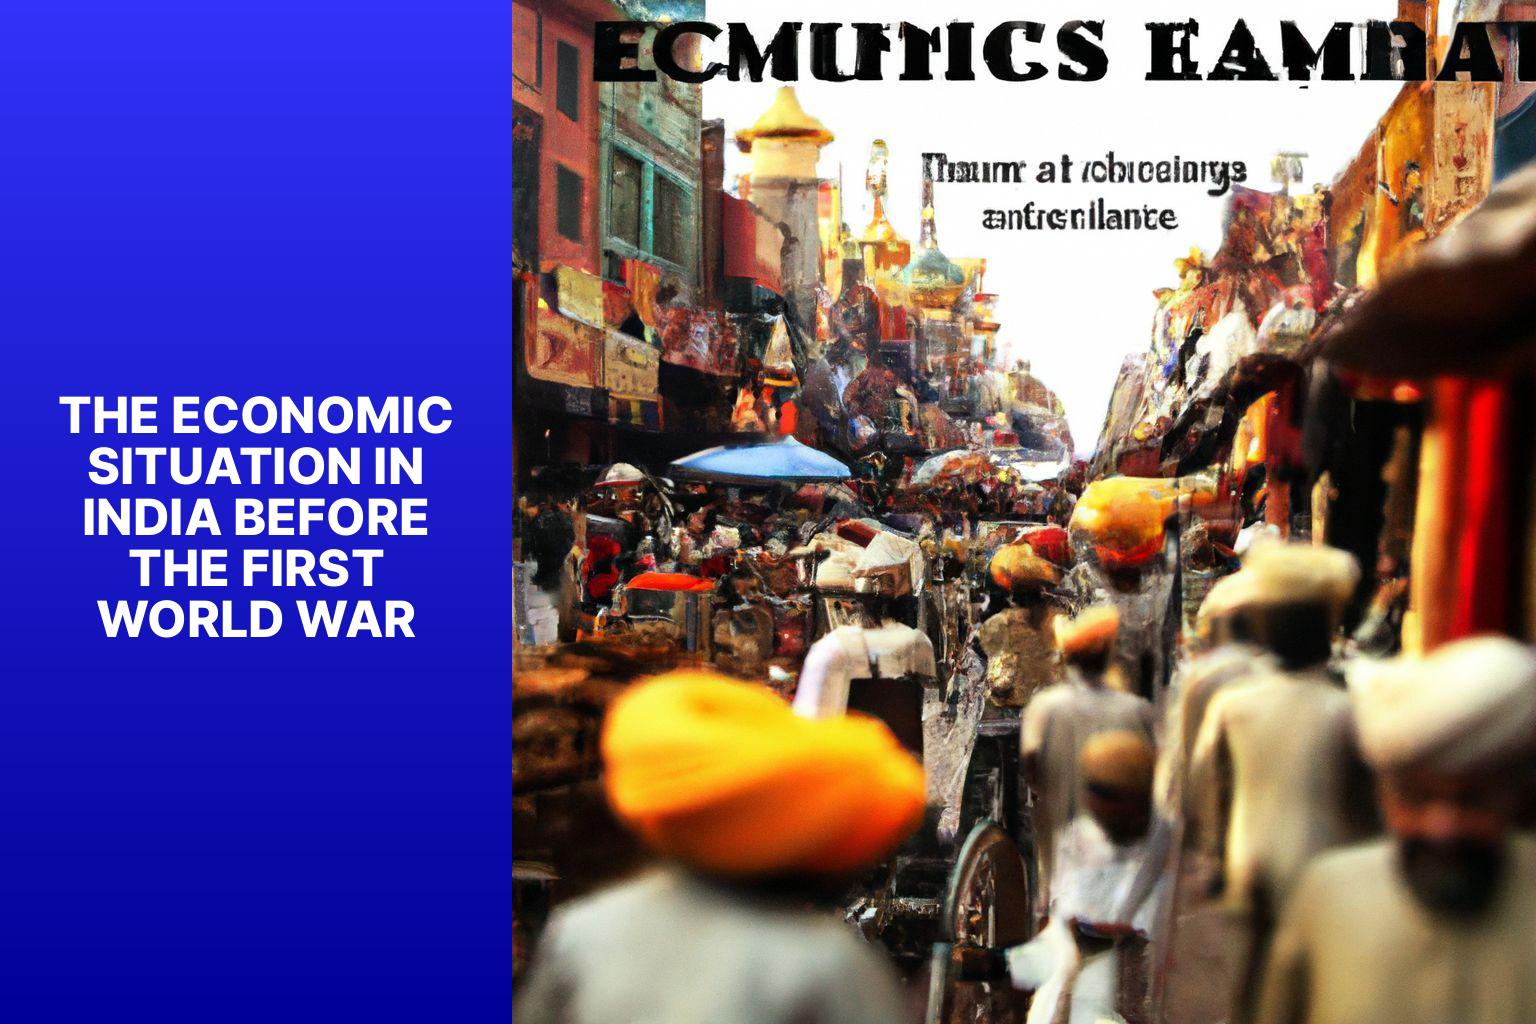 The Economic Situation in India Before the First World War - What Economic Impact did the First World War Have on India 